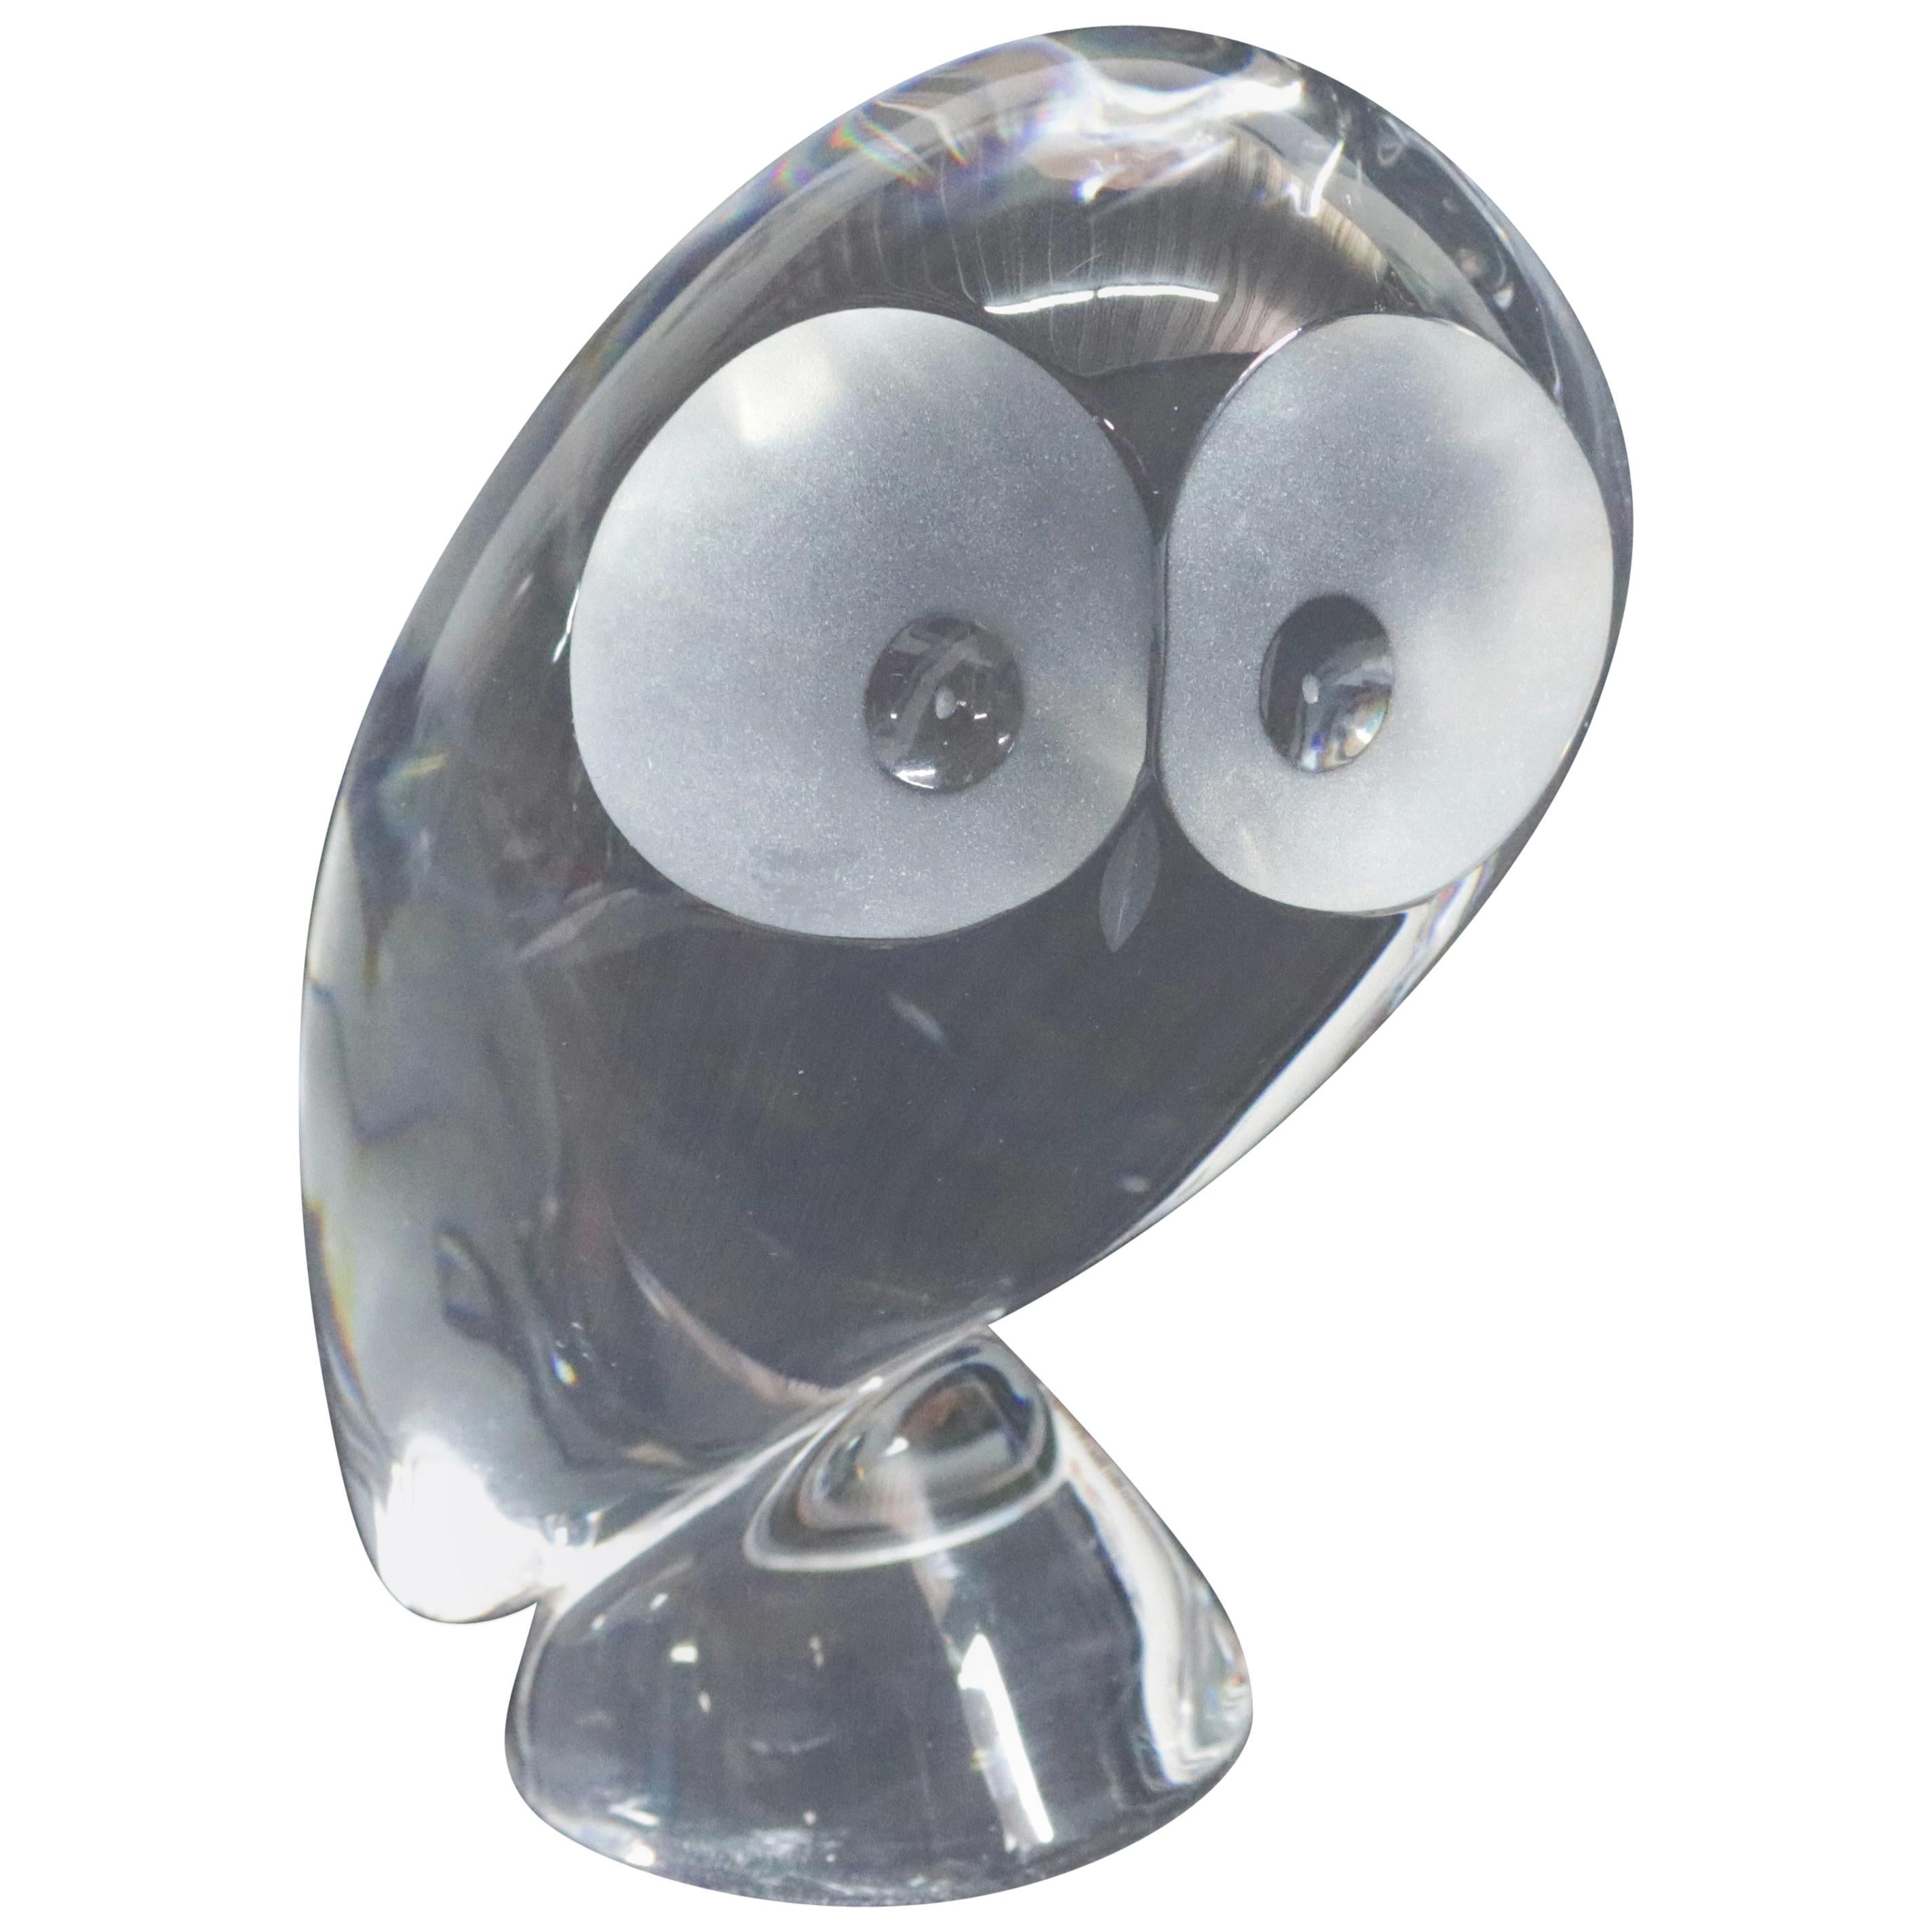 Steuben Figurative Crystal Sculpture Owl Paperweight by Pollard, Signed